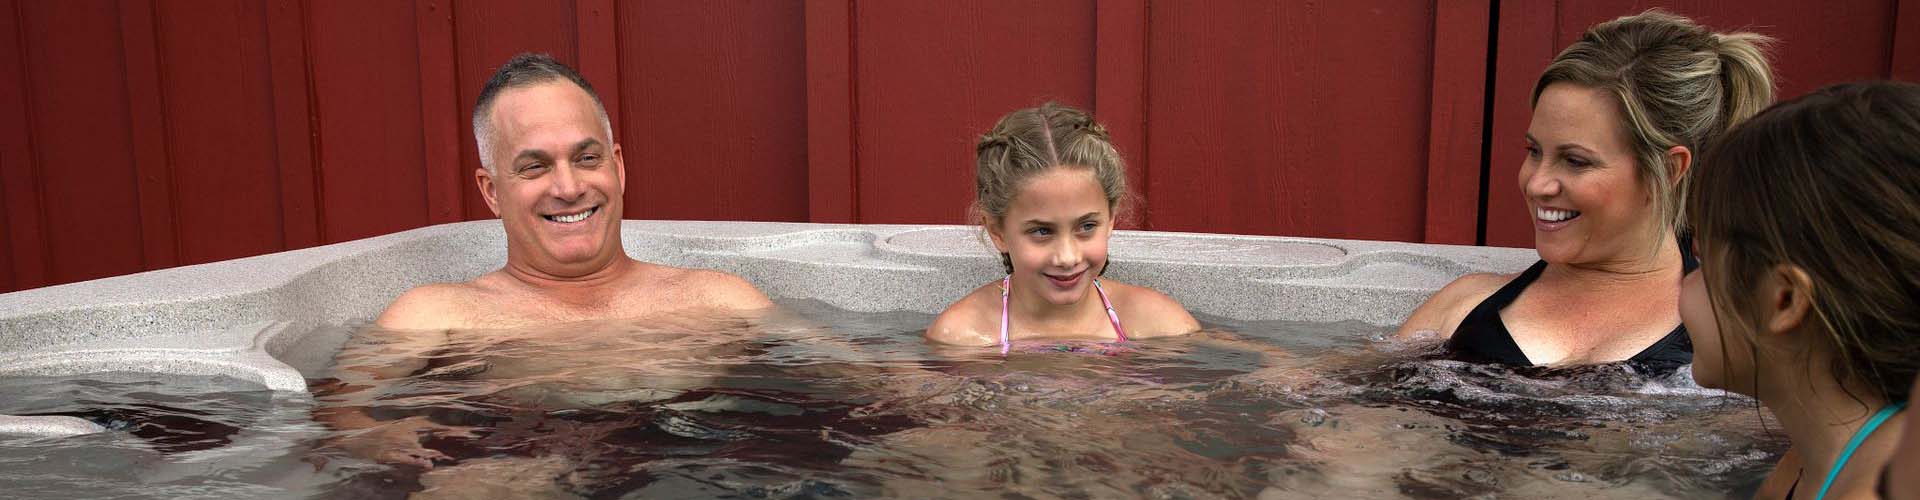 7 Ways a Hot Tub is Better than a Couch